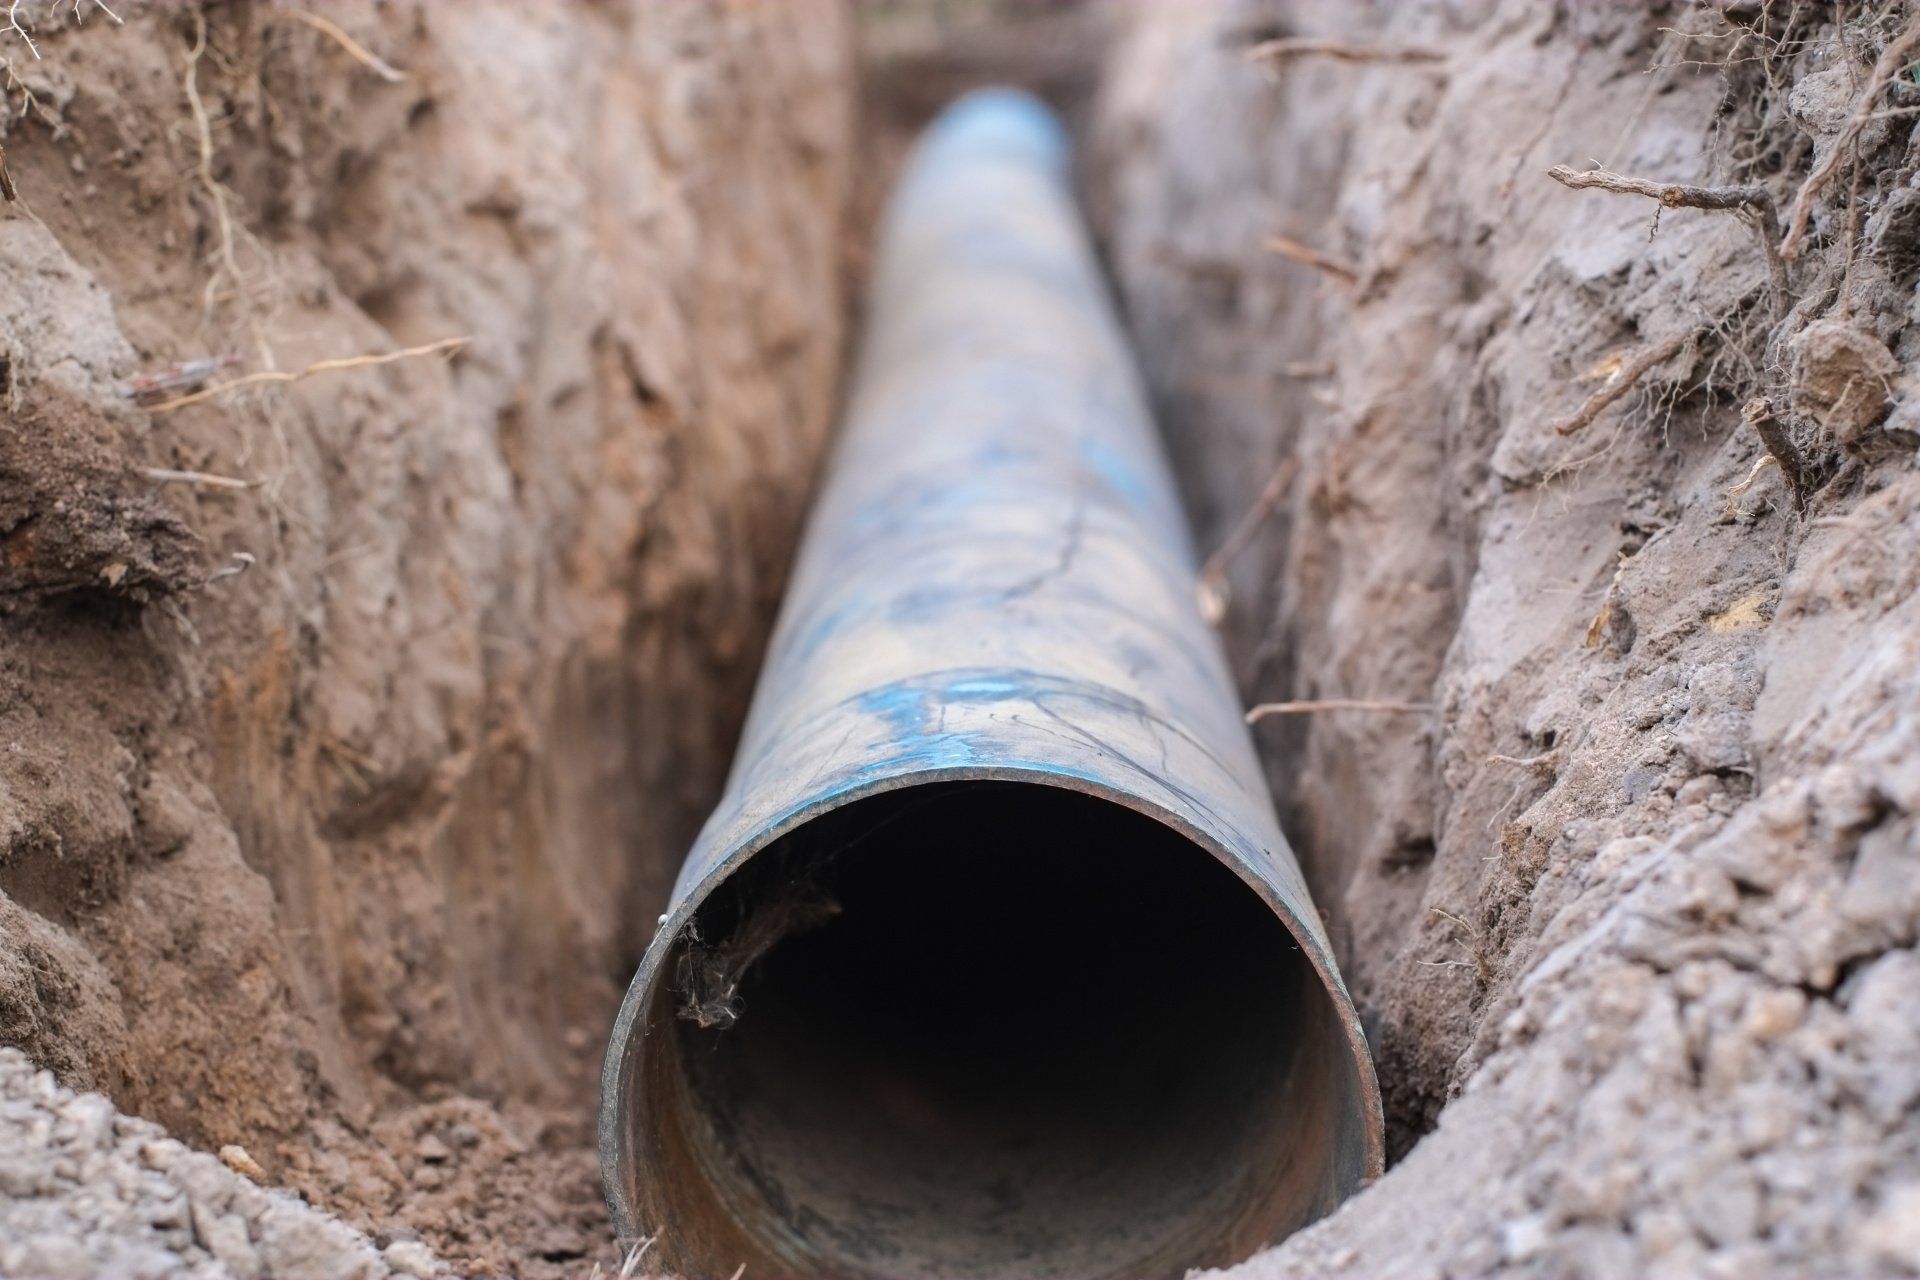 Piping For An Effective Sanitary Sewer System